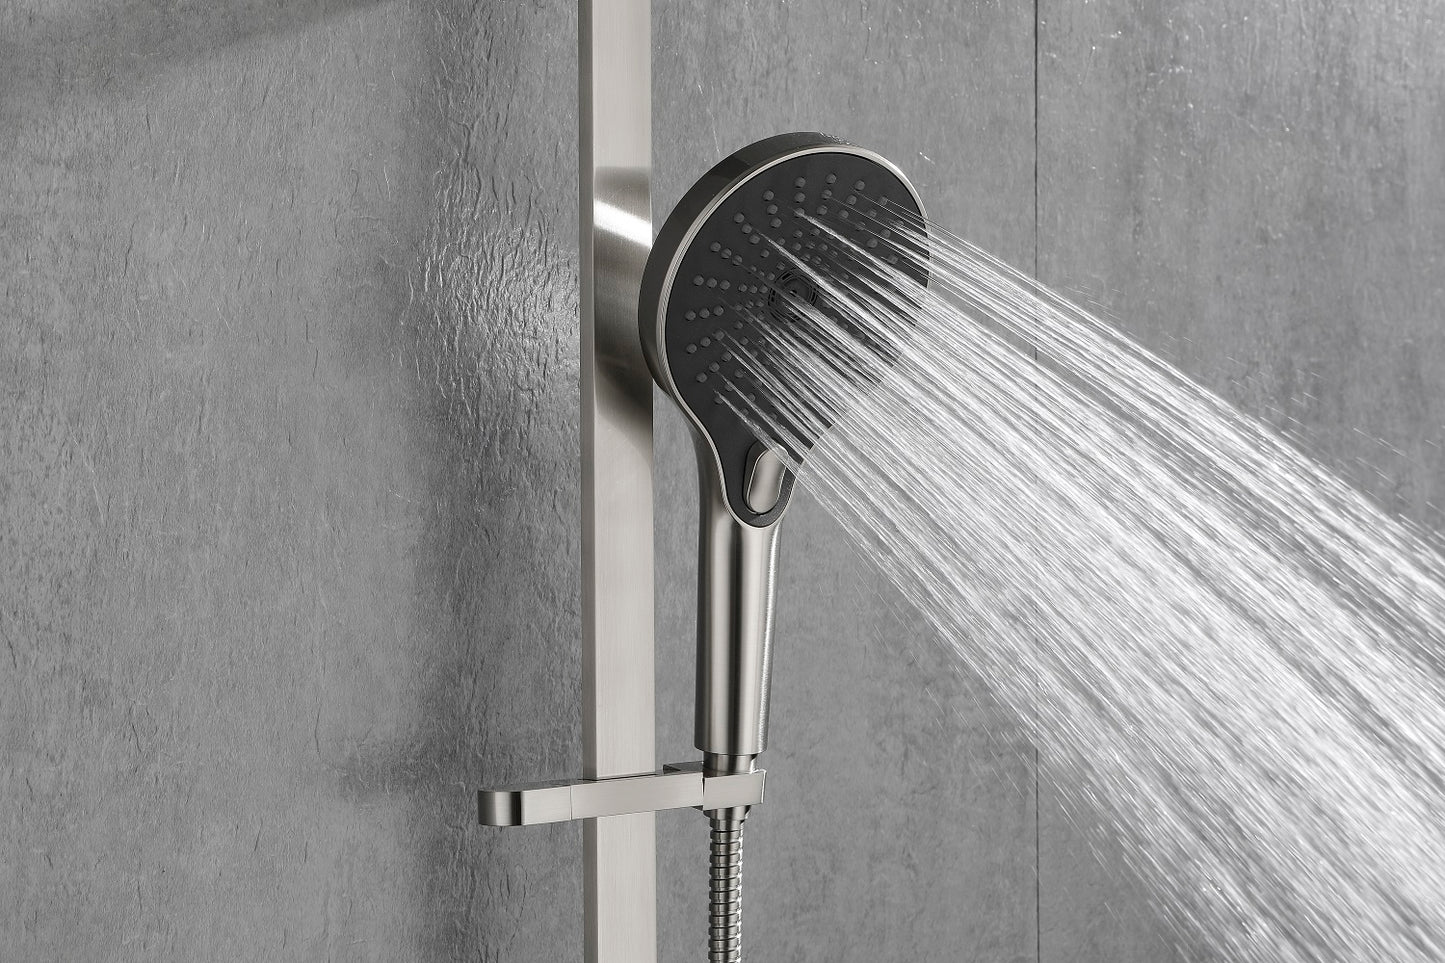 SH-Love-W1272: SHOWERS Stainless Steel Slide Bar Grab Rail Includes Handheld Shower Head and 69-Inch Hose